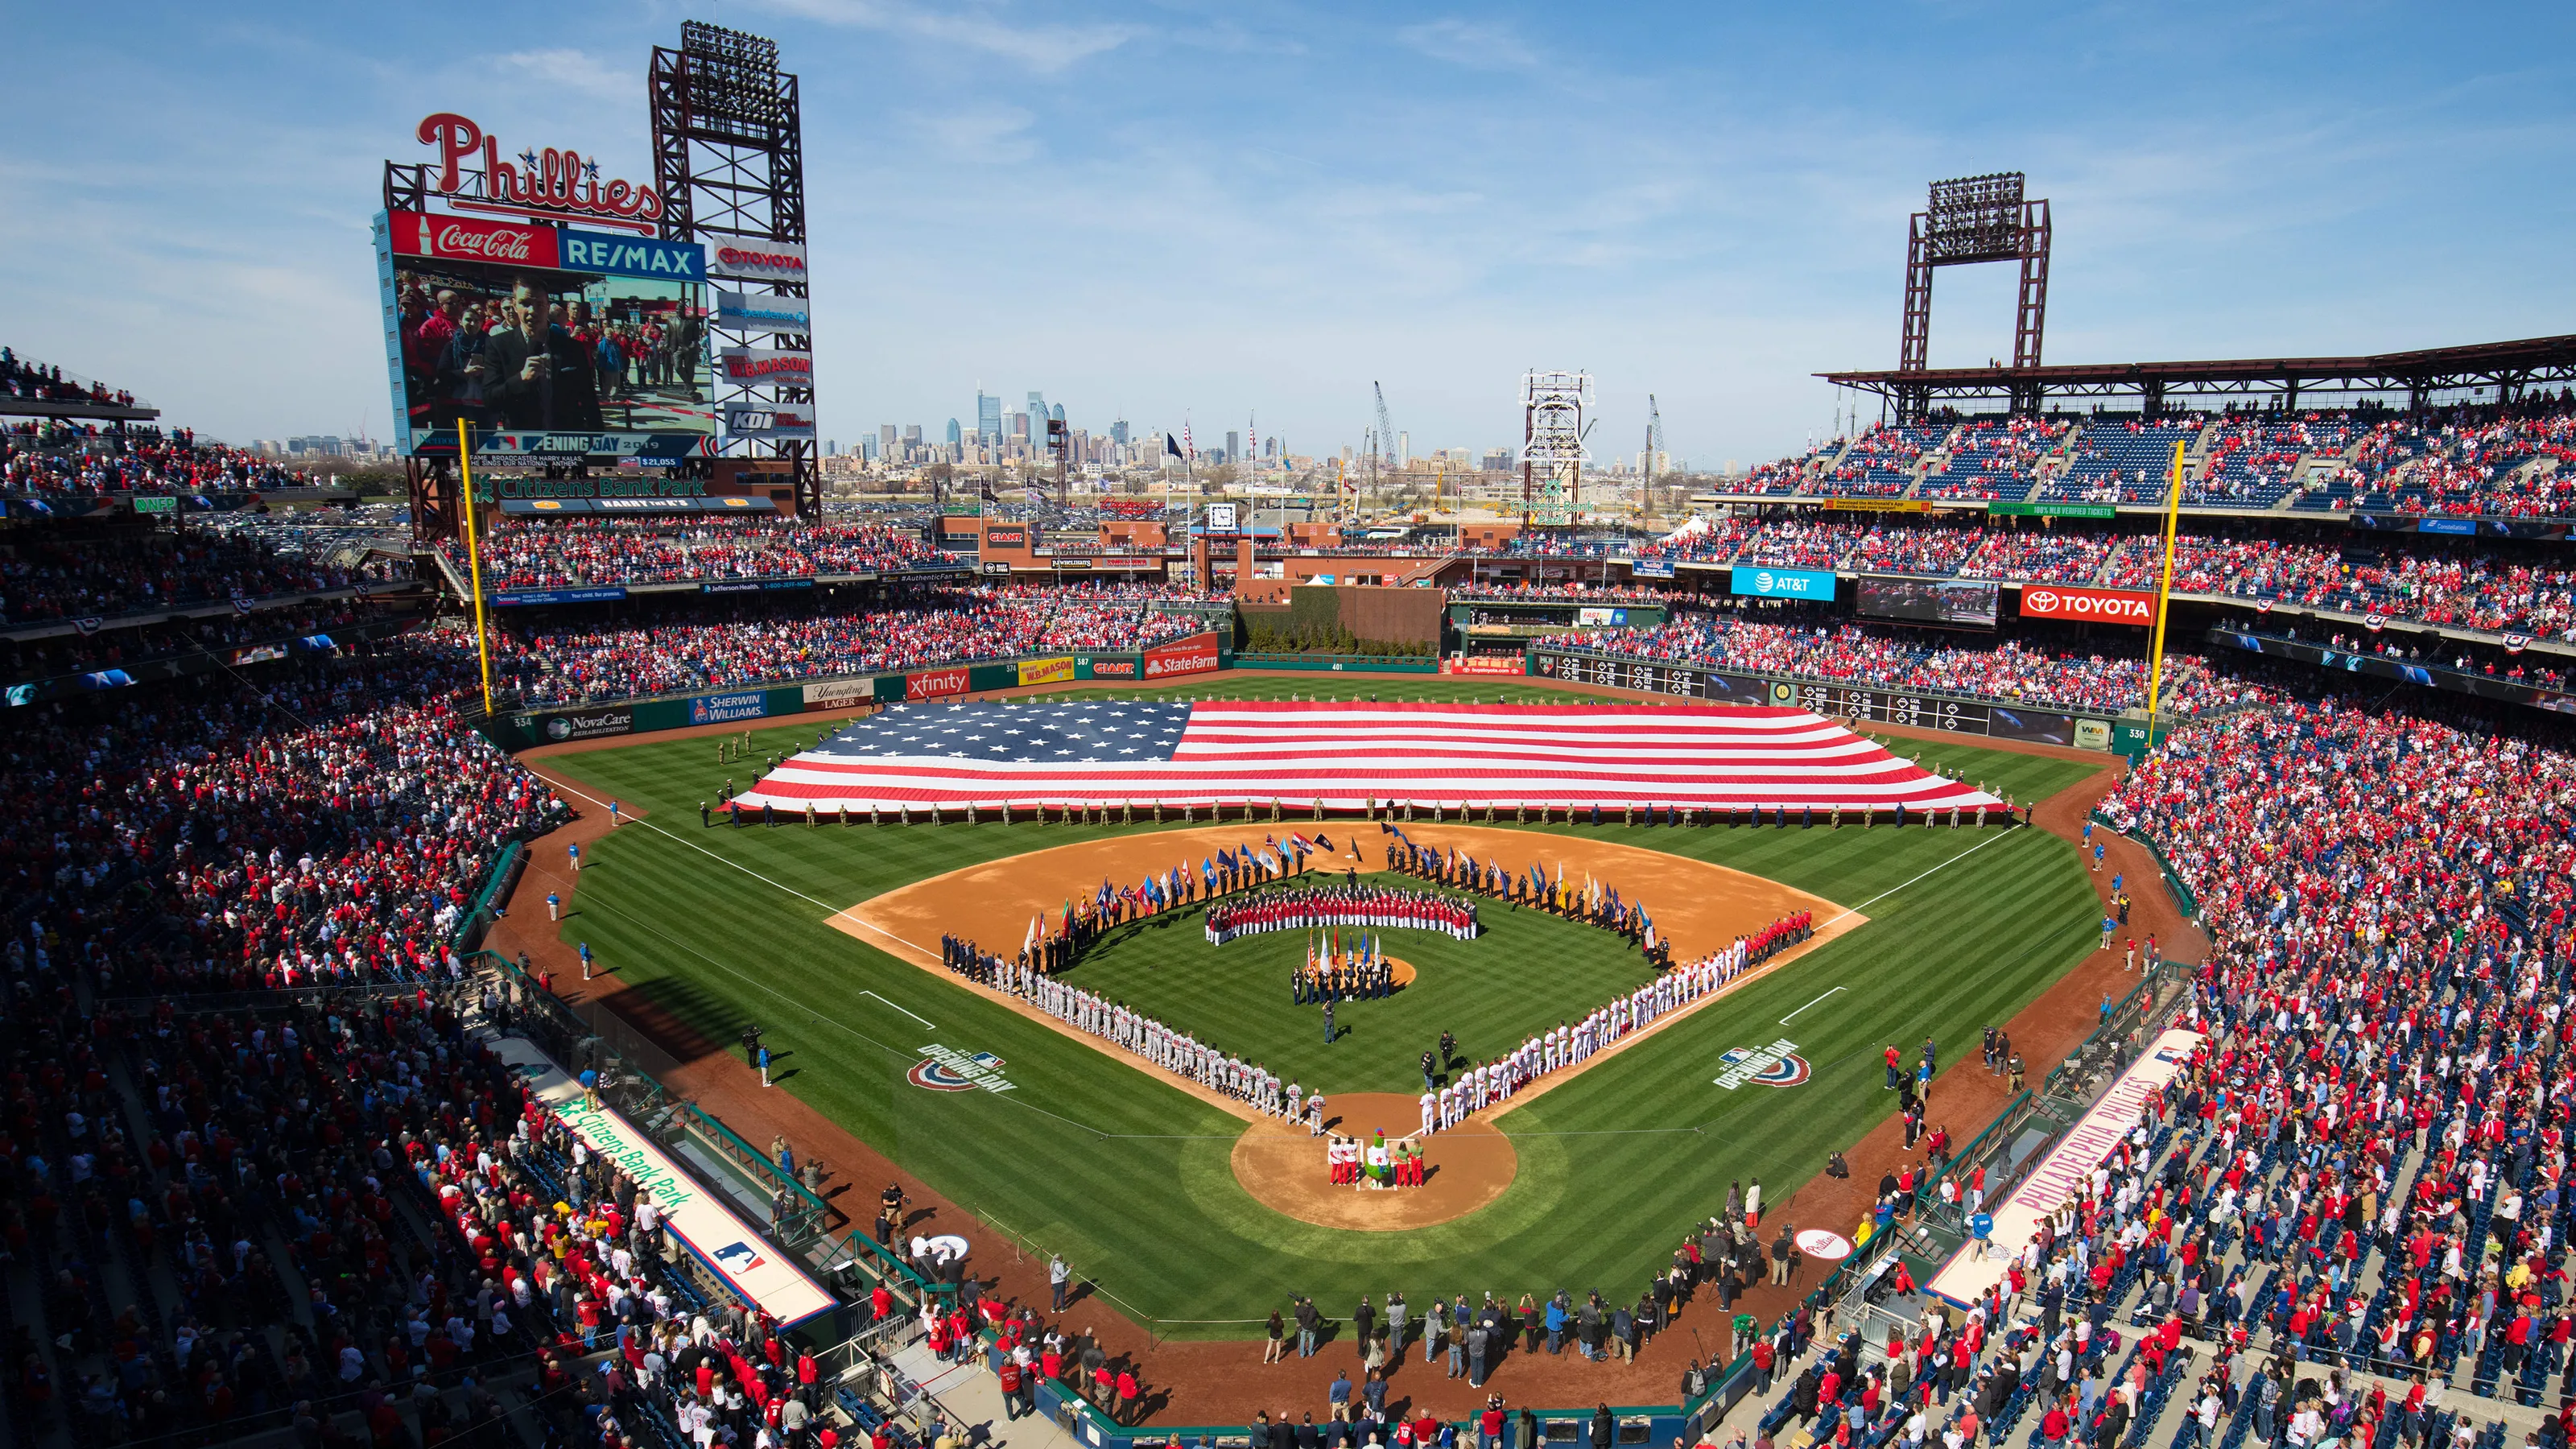 The Grand Slam Of American Pastimes - The Importance Of MLB In The USA